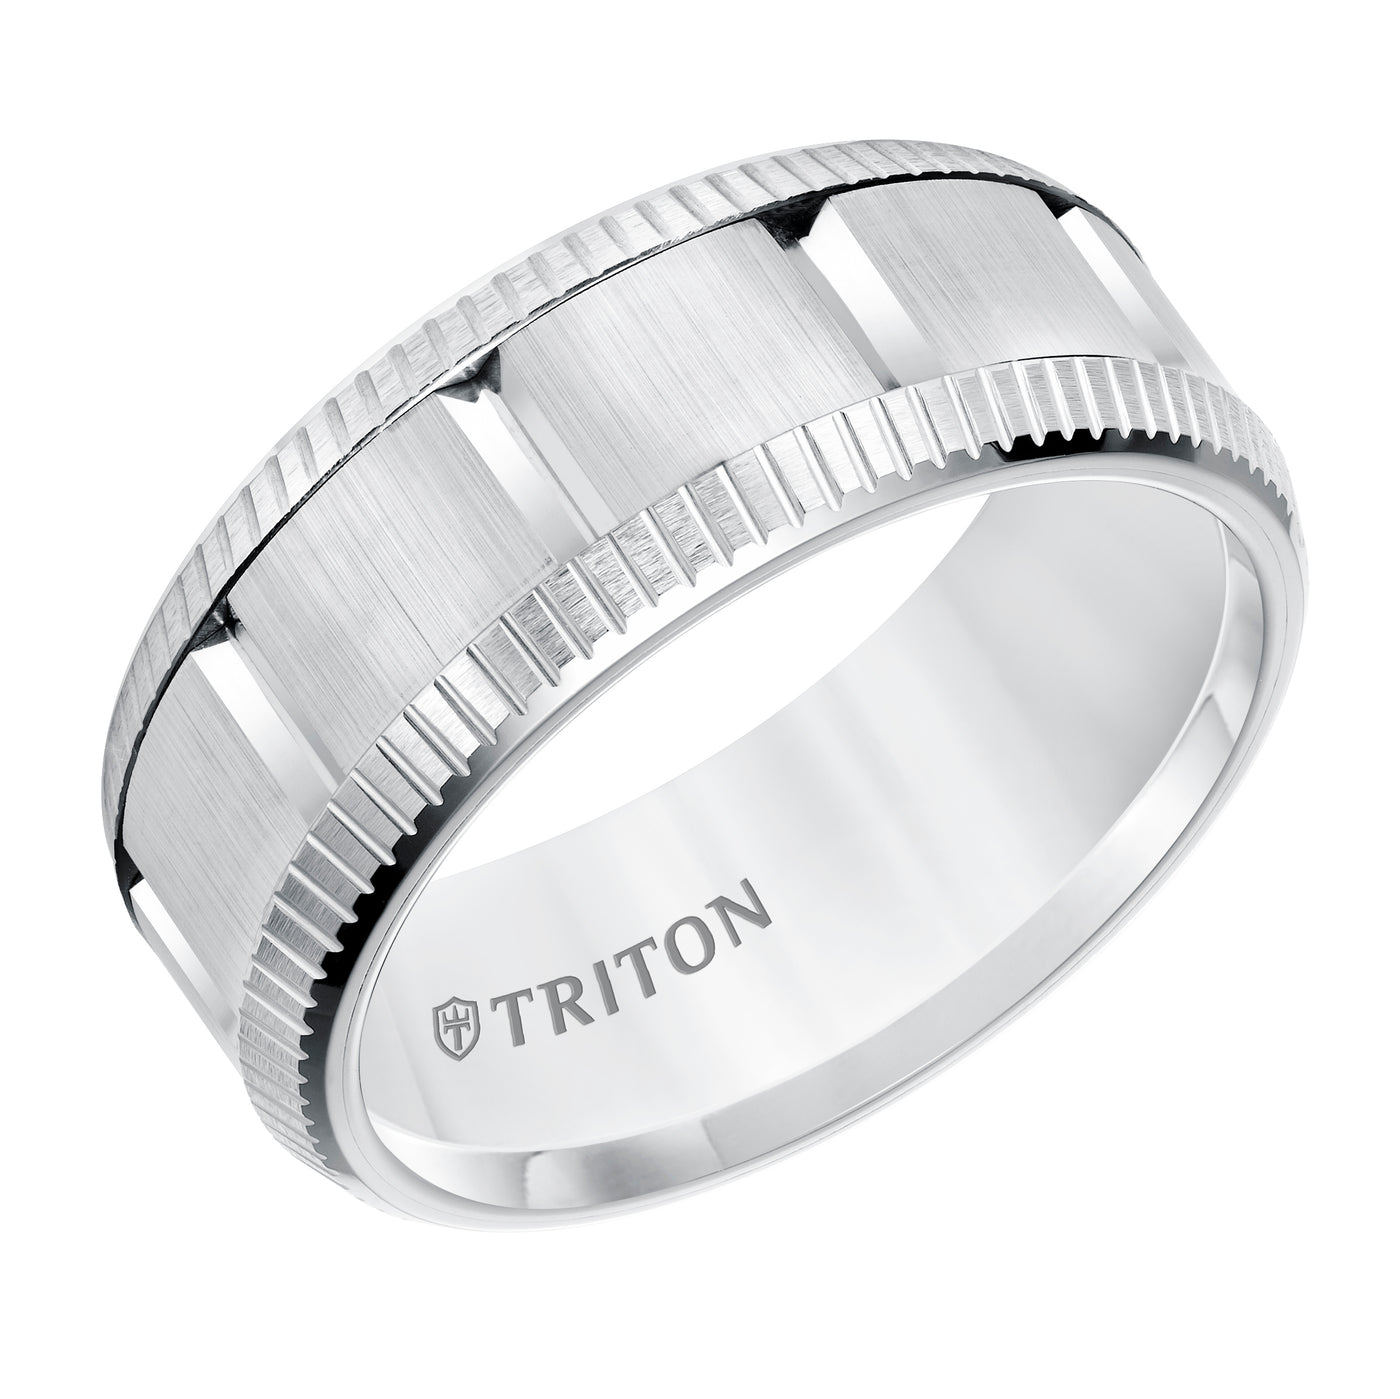 Multi Piece White Tungsten Carbide Comfort Fit Band with Bright Coin Rims & Vertical Cuts